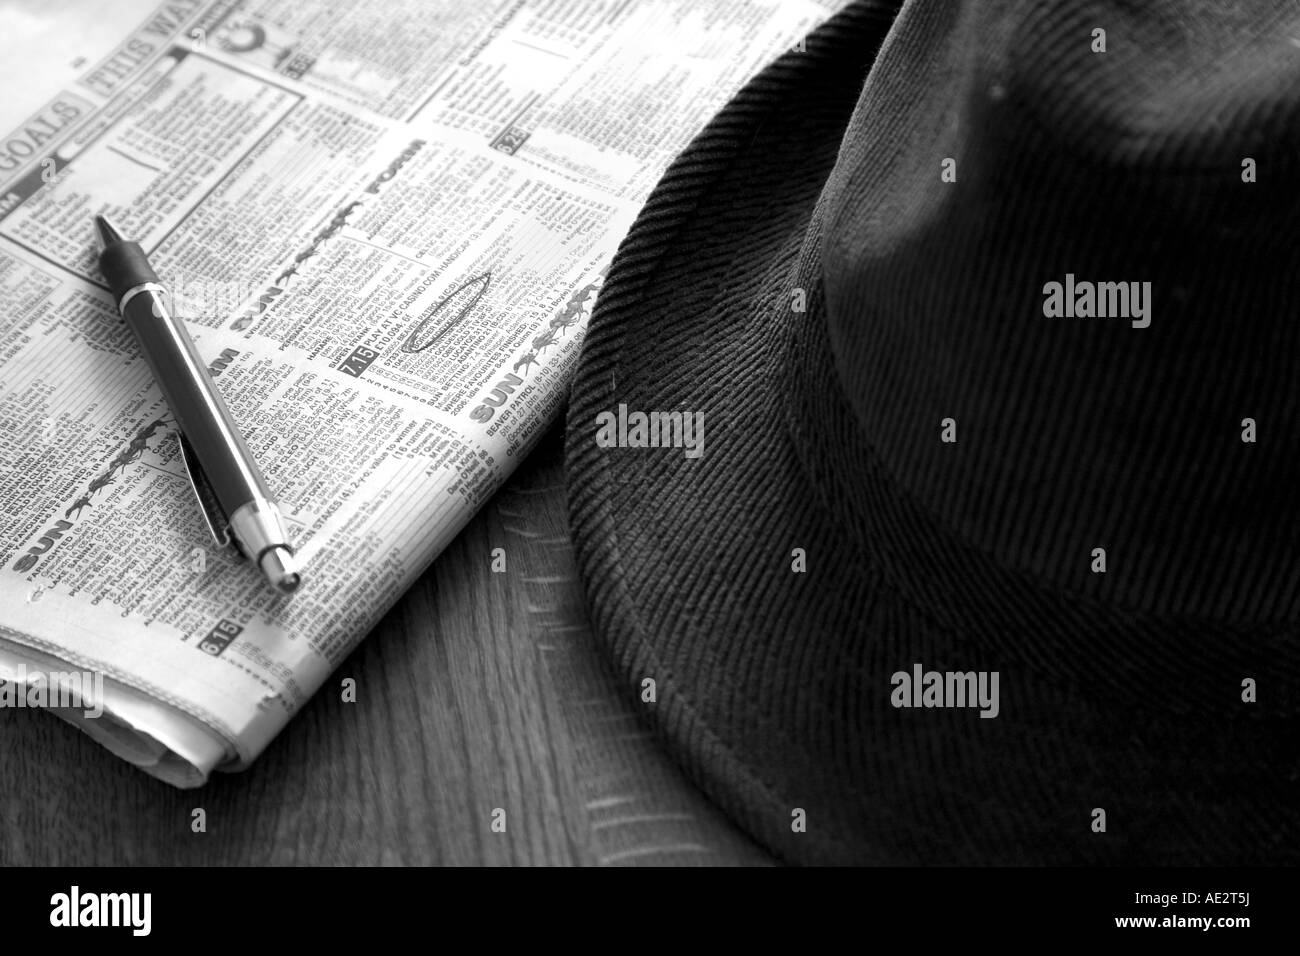 hat newspaper and pen on the horse racing page Stock Photo